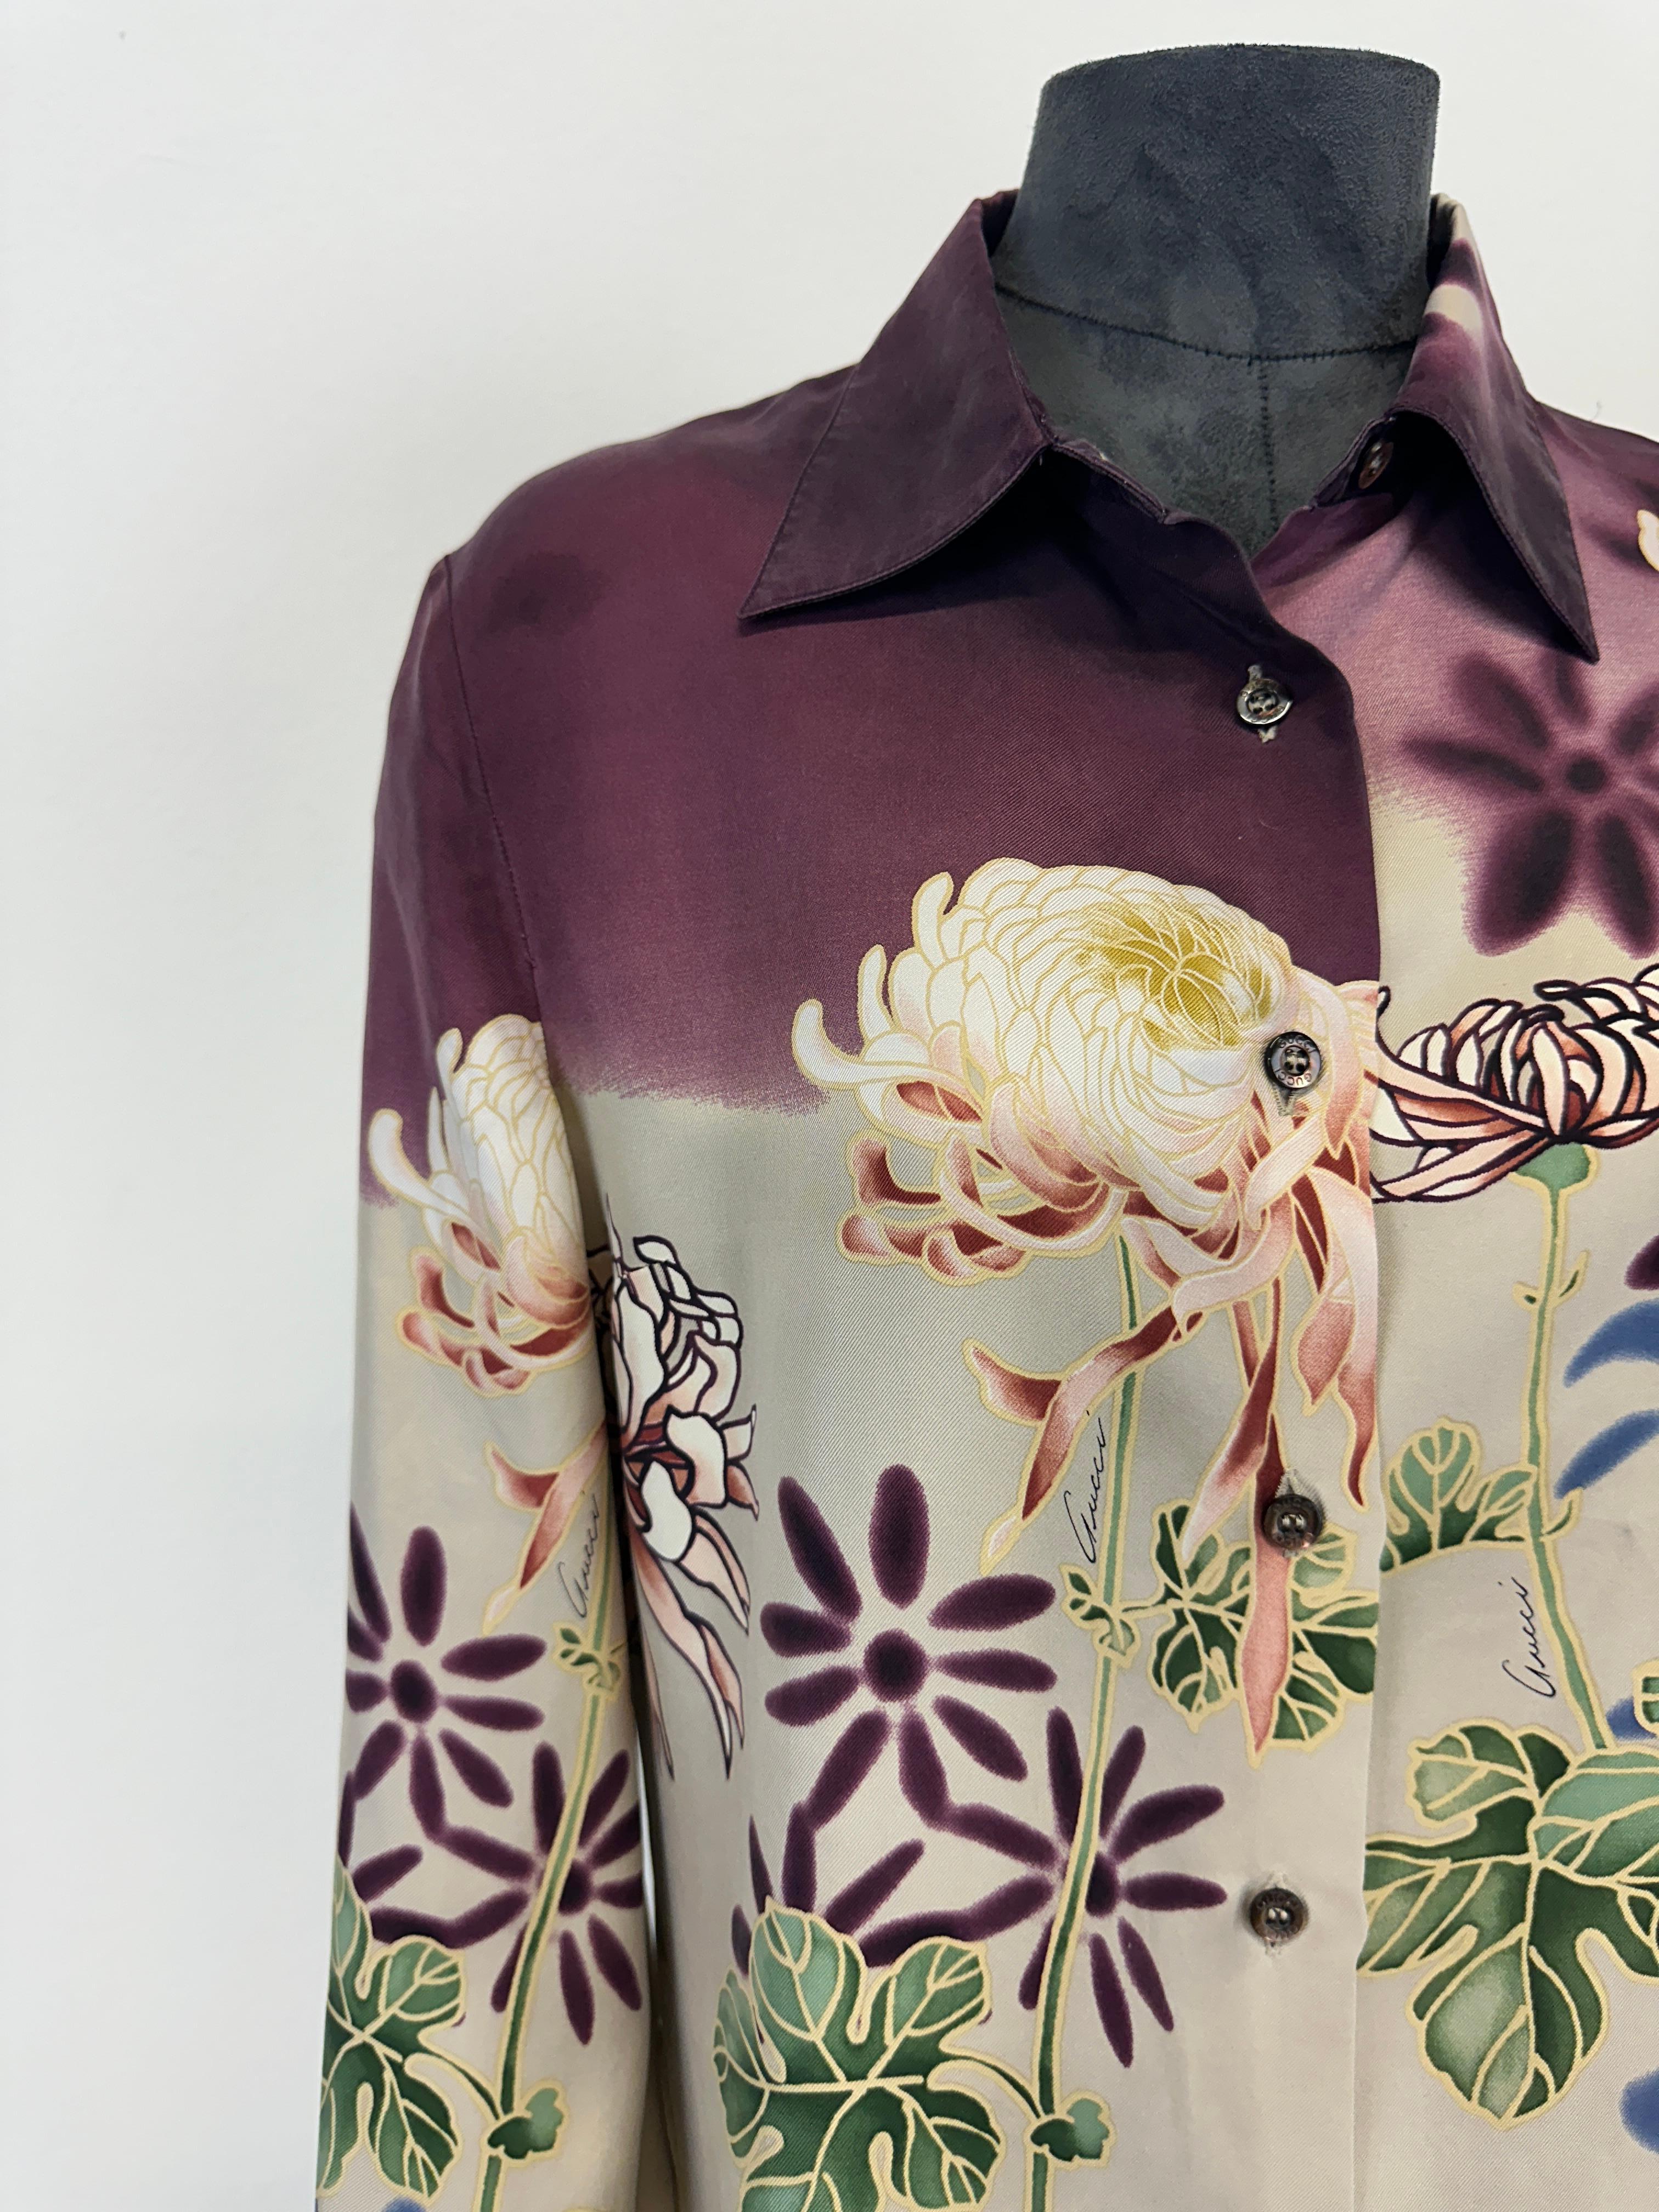 S/S 2001 Gucci by Tom Ford Chrysanthemum woman shirt

Description:
Gucci best era when Tom Ford completely transformed the brand. The same print with Chrysanthemum flowers was featured in the spring summer 2001 menswear runway and this shirt is a